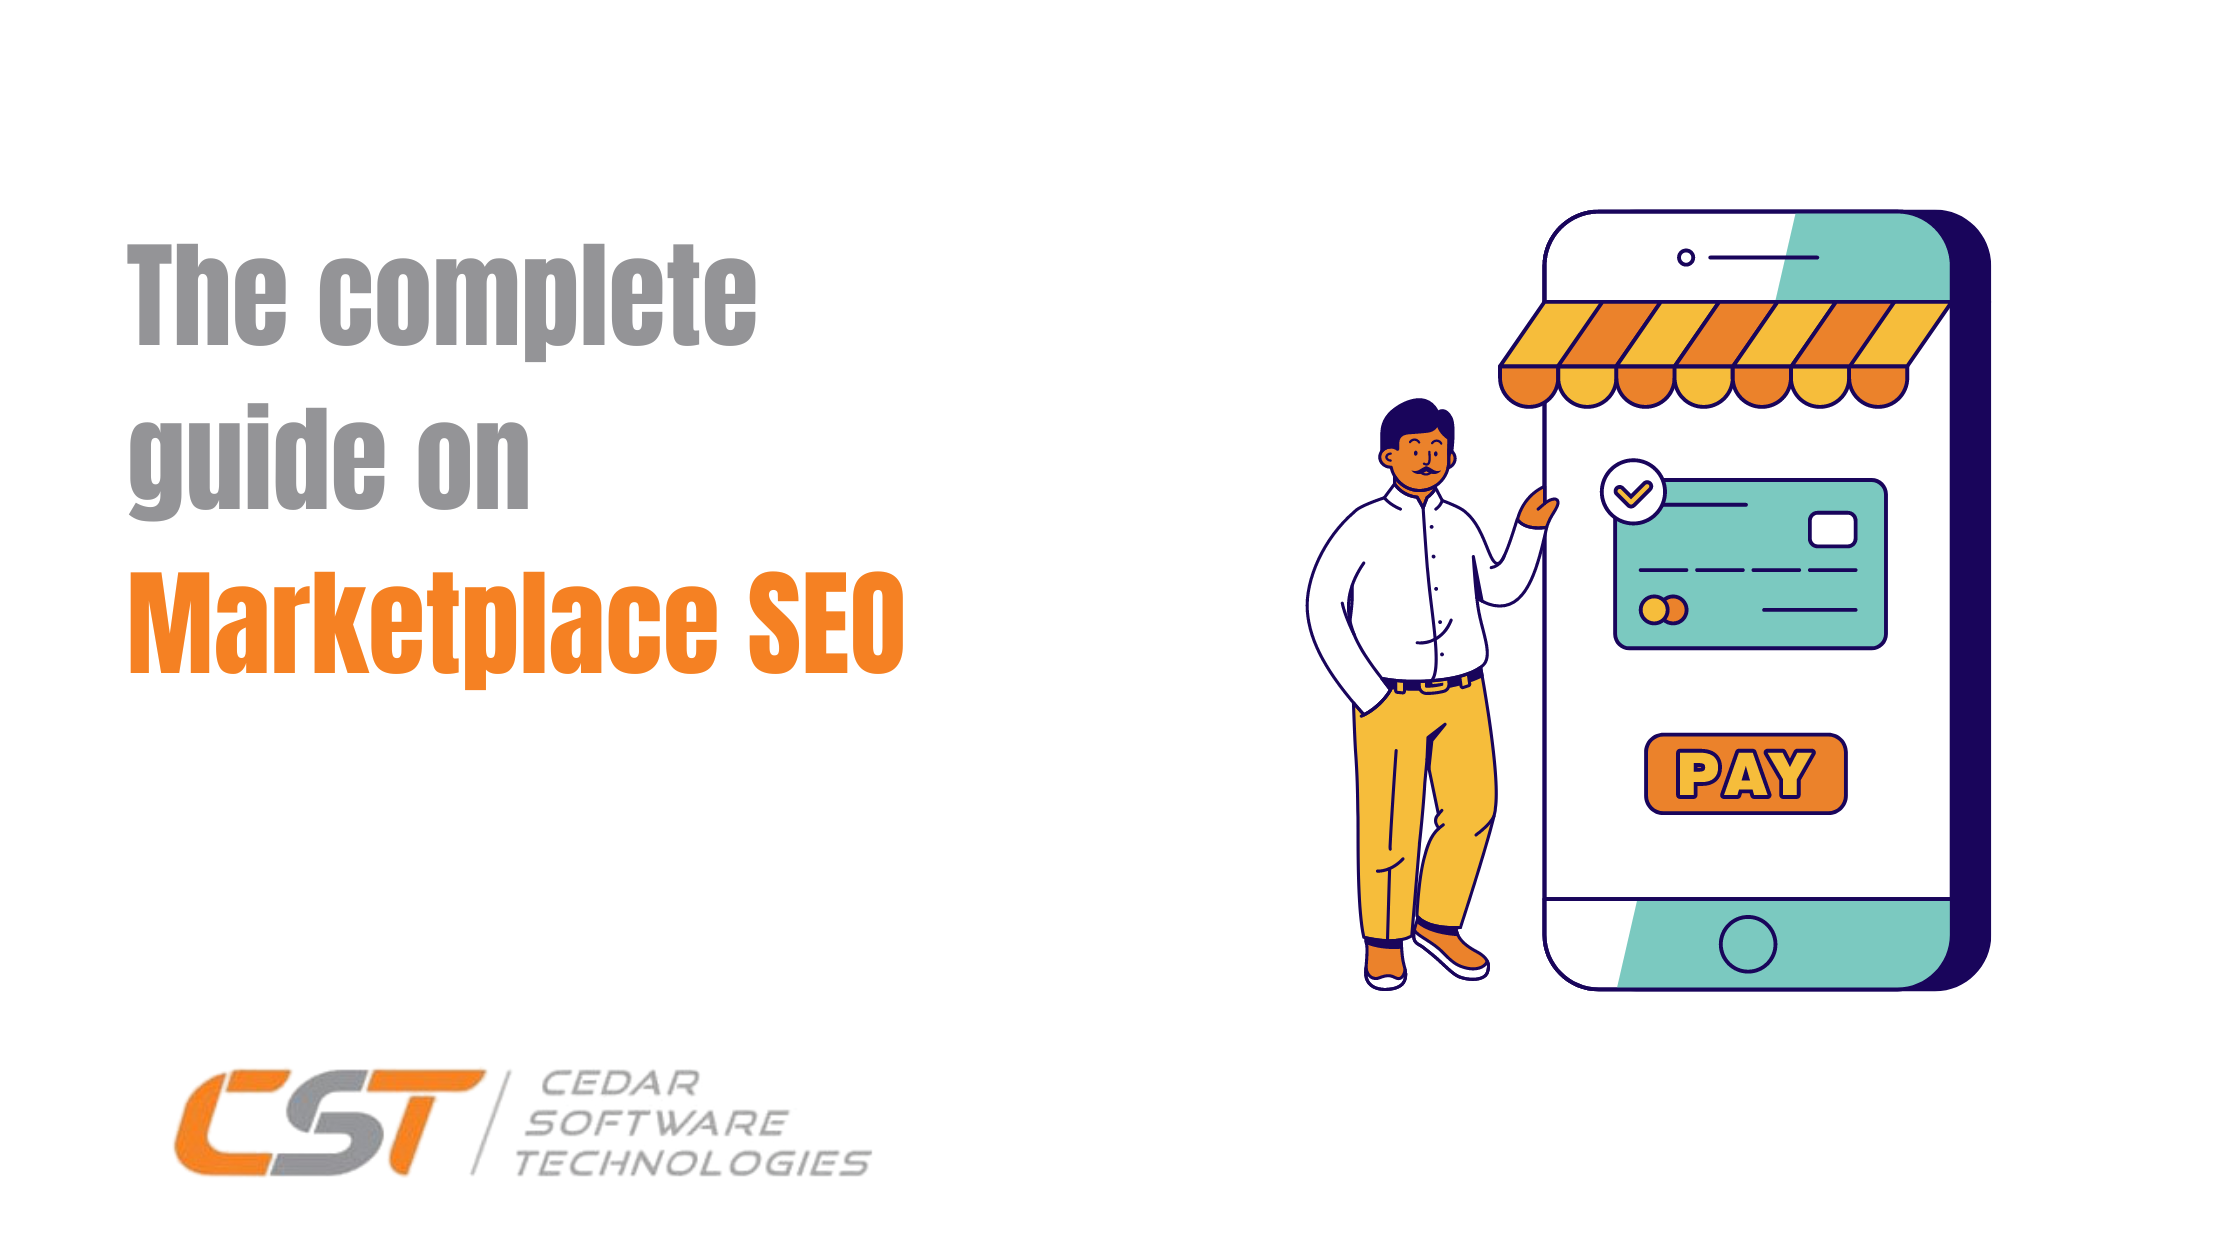 The complete guide on Marketplace SEO